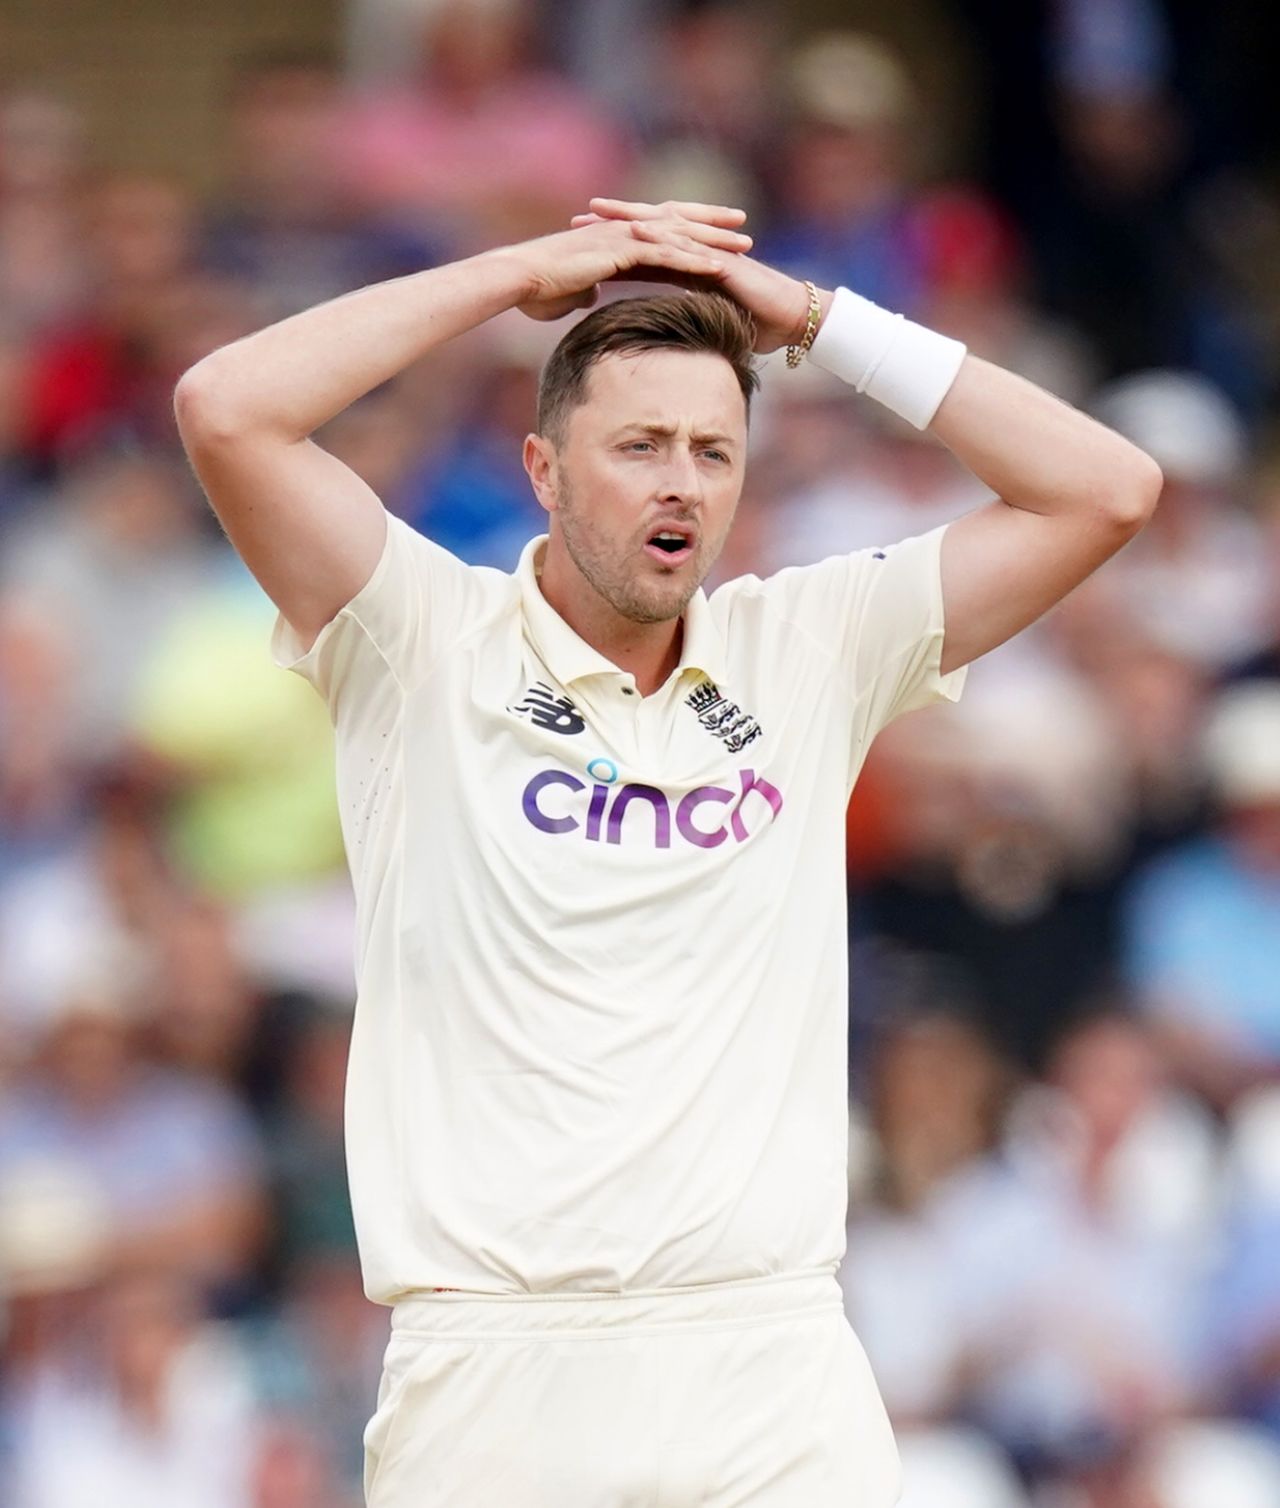 Ollie Robinson reacts to a close call for India's openers, England vs India, 1st Test, Nottingham, 2nd day, August 5, 2021